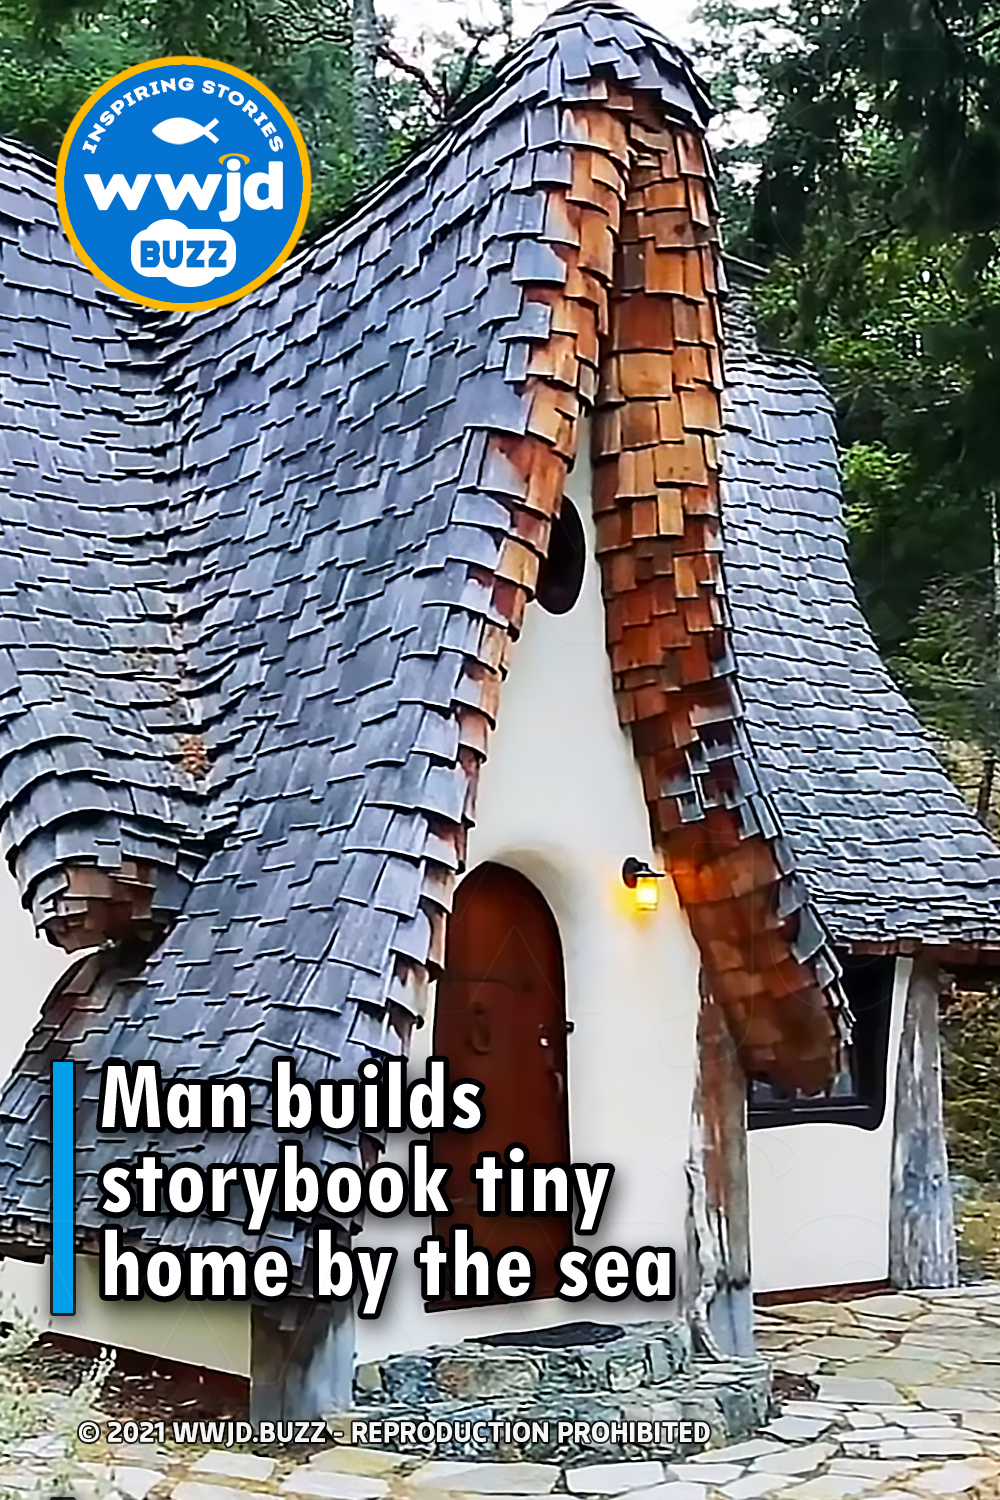 Man builds storybook tiny home by the sea